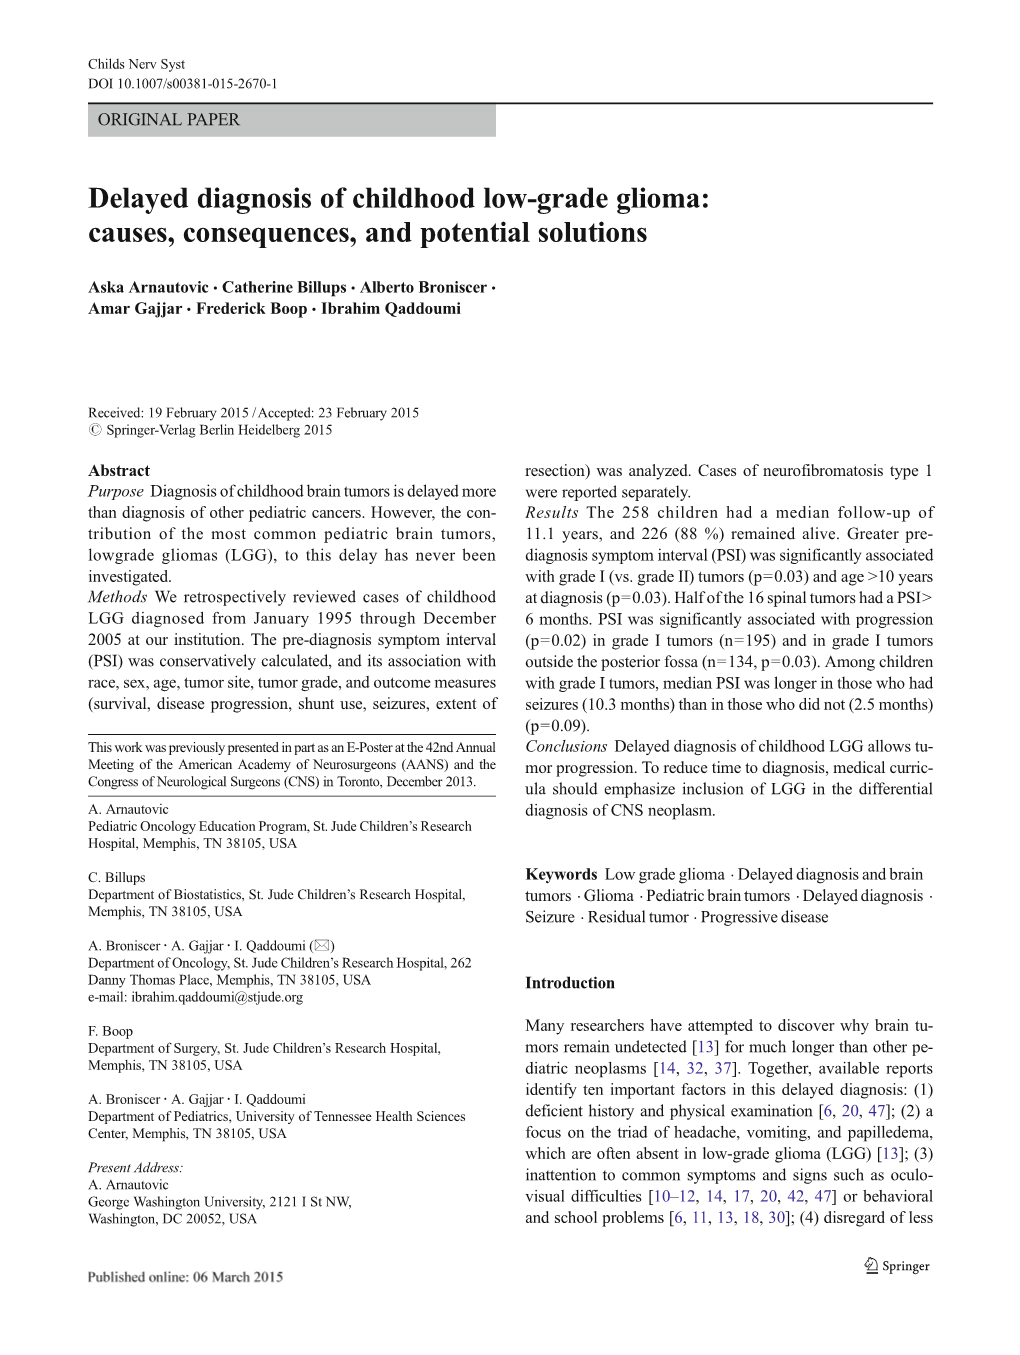 Delayed Diagnosis of Childhood Low-Grade Glioma: Causes, Consequences, and Potential Solutions